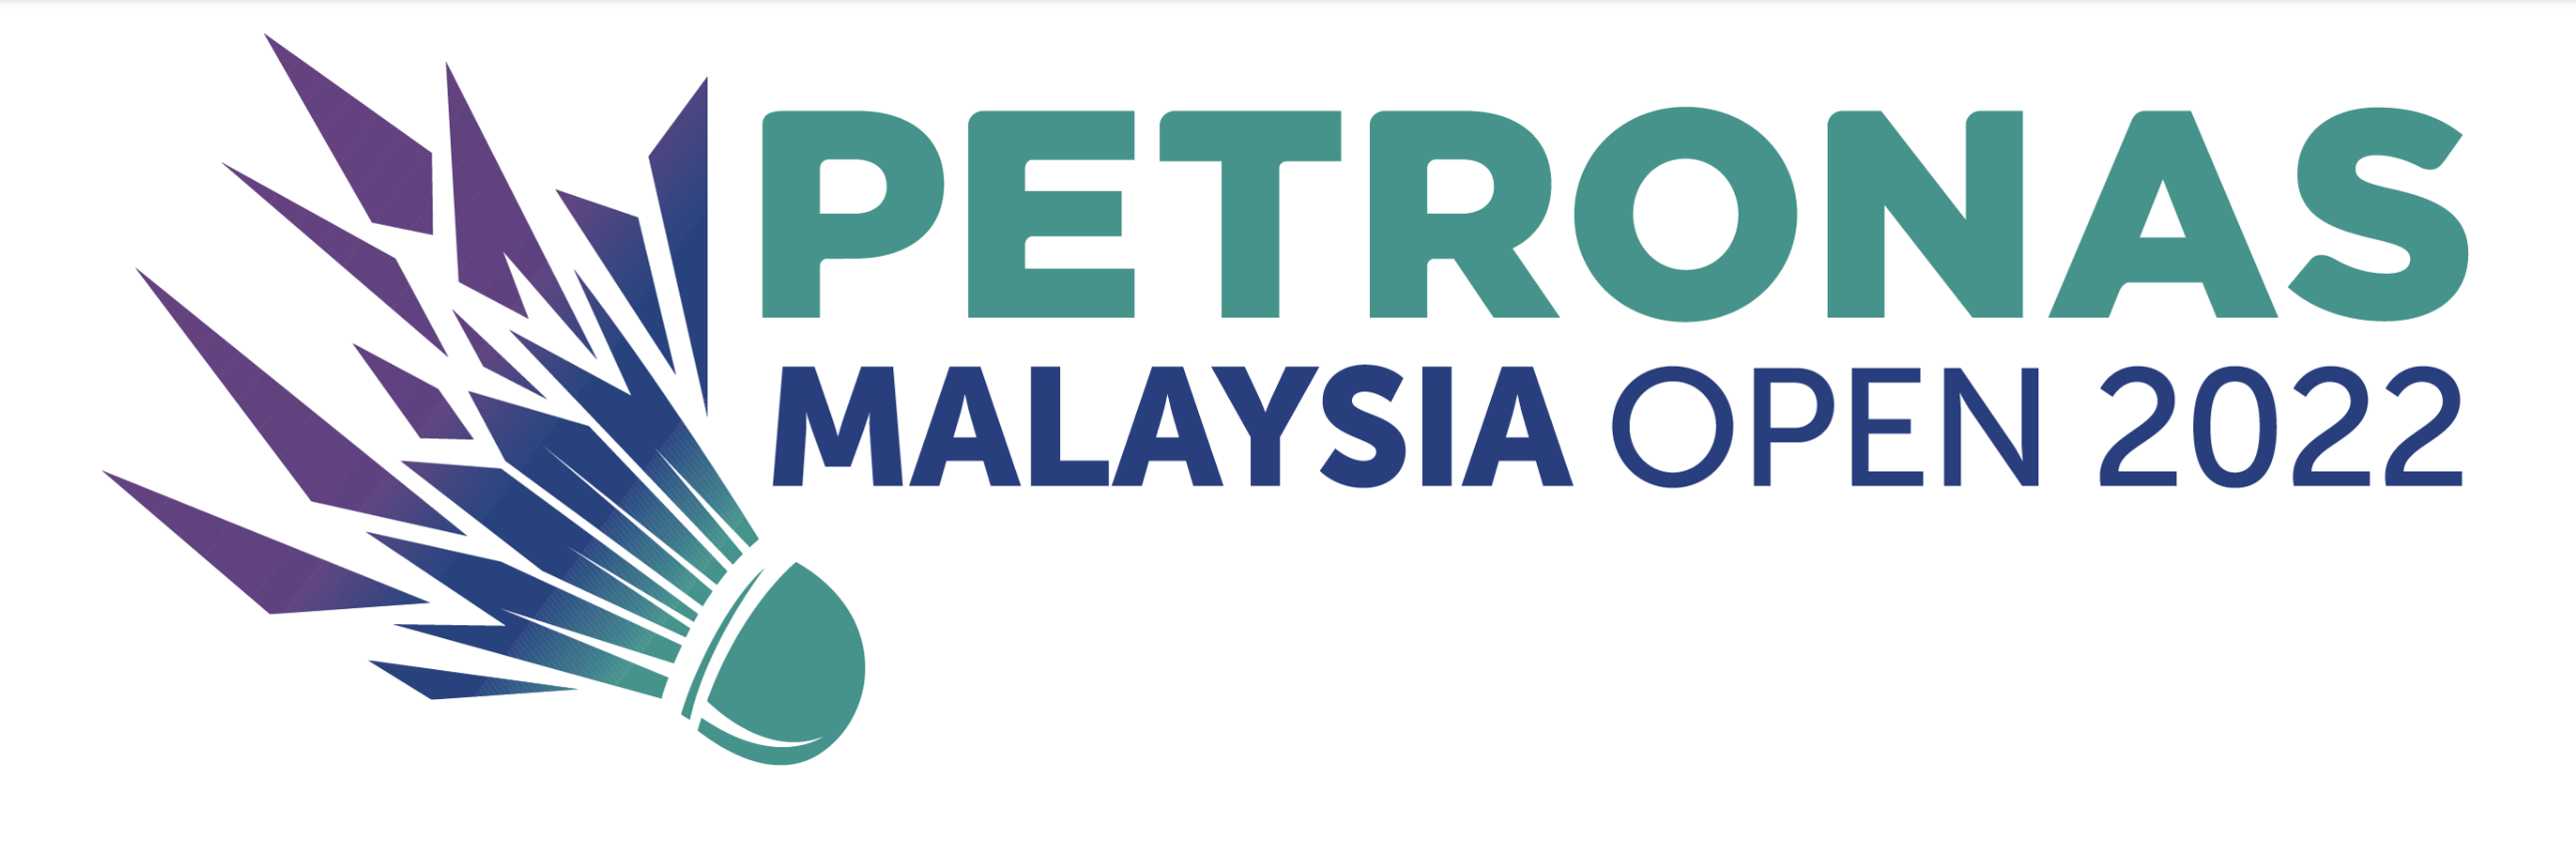 PETRONAS MALAYSIA OPEN 2022 tickets go on sale May 26th!